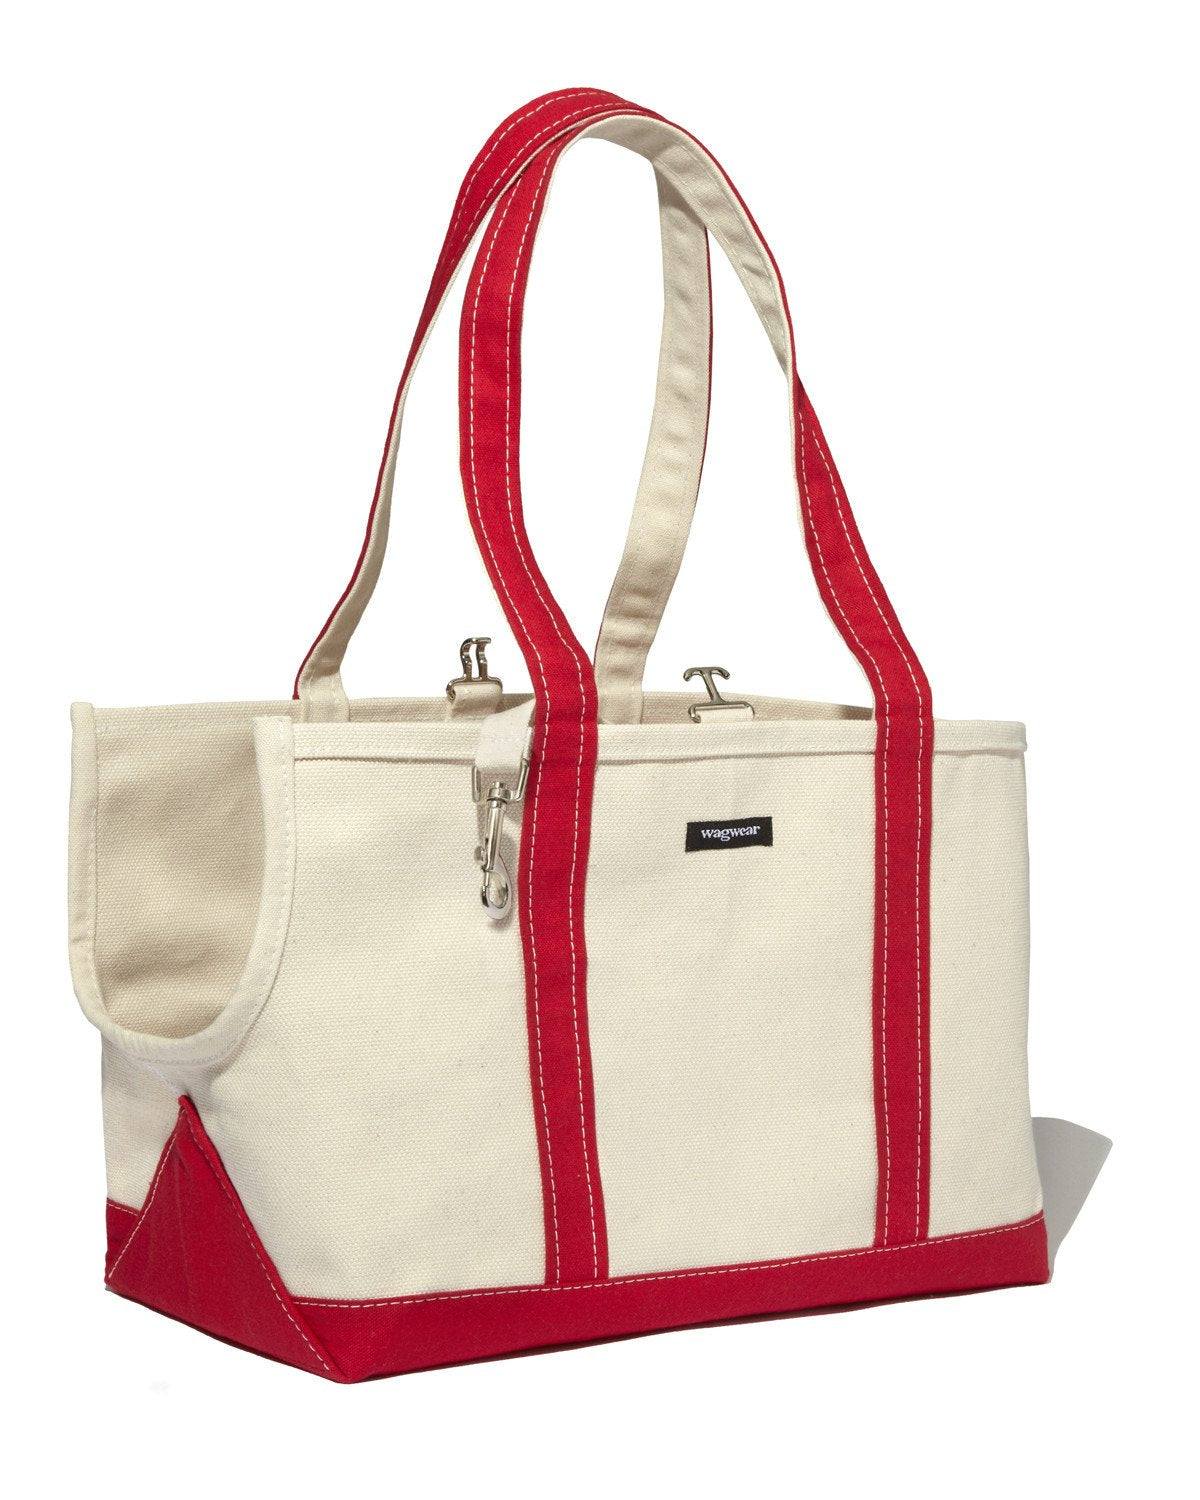 Wholesale Canvas Medium Boat Tote in Red